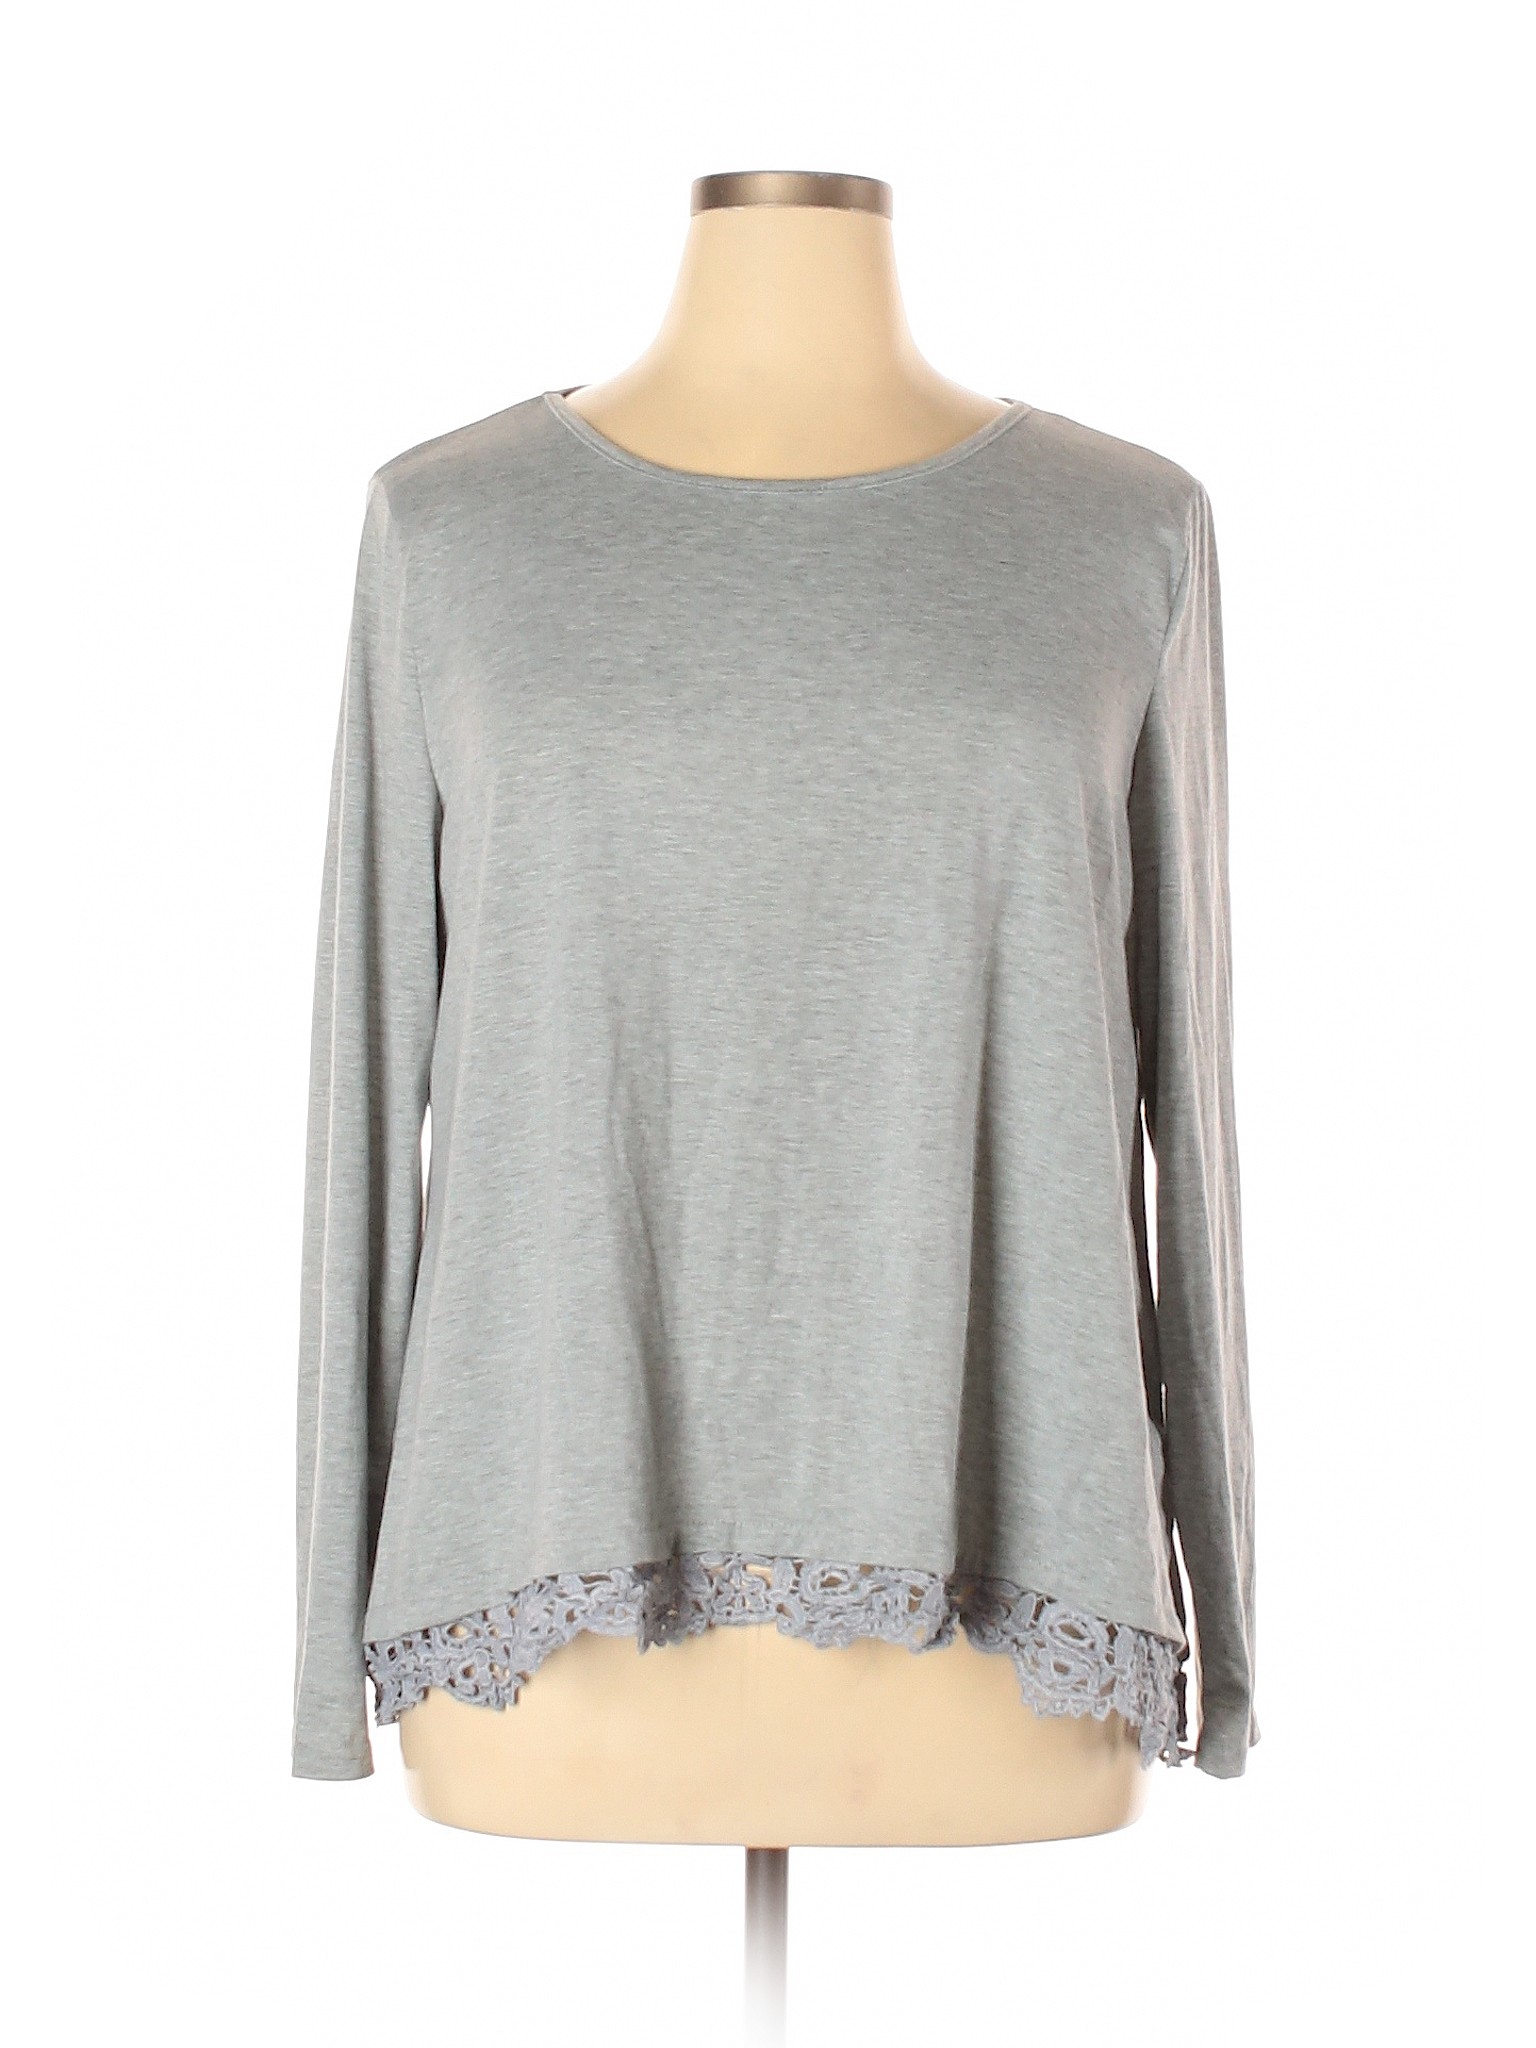 Zanzea Collection 100% Polyester Solid Gray Long Sleeve Top Size XL ...